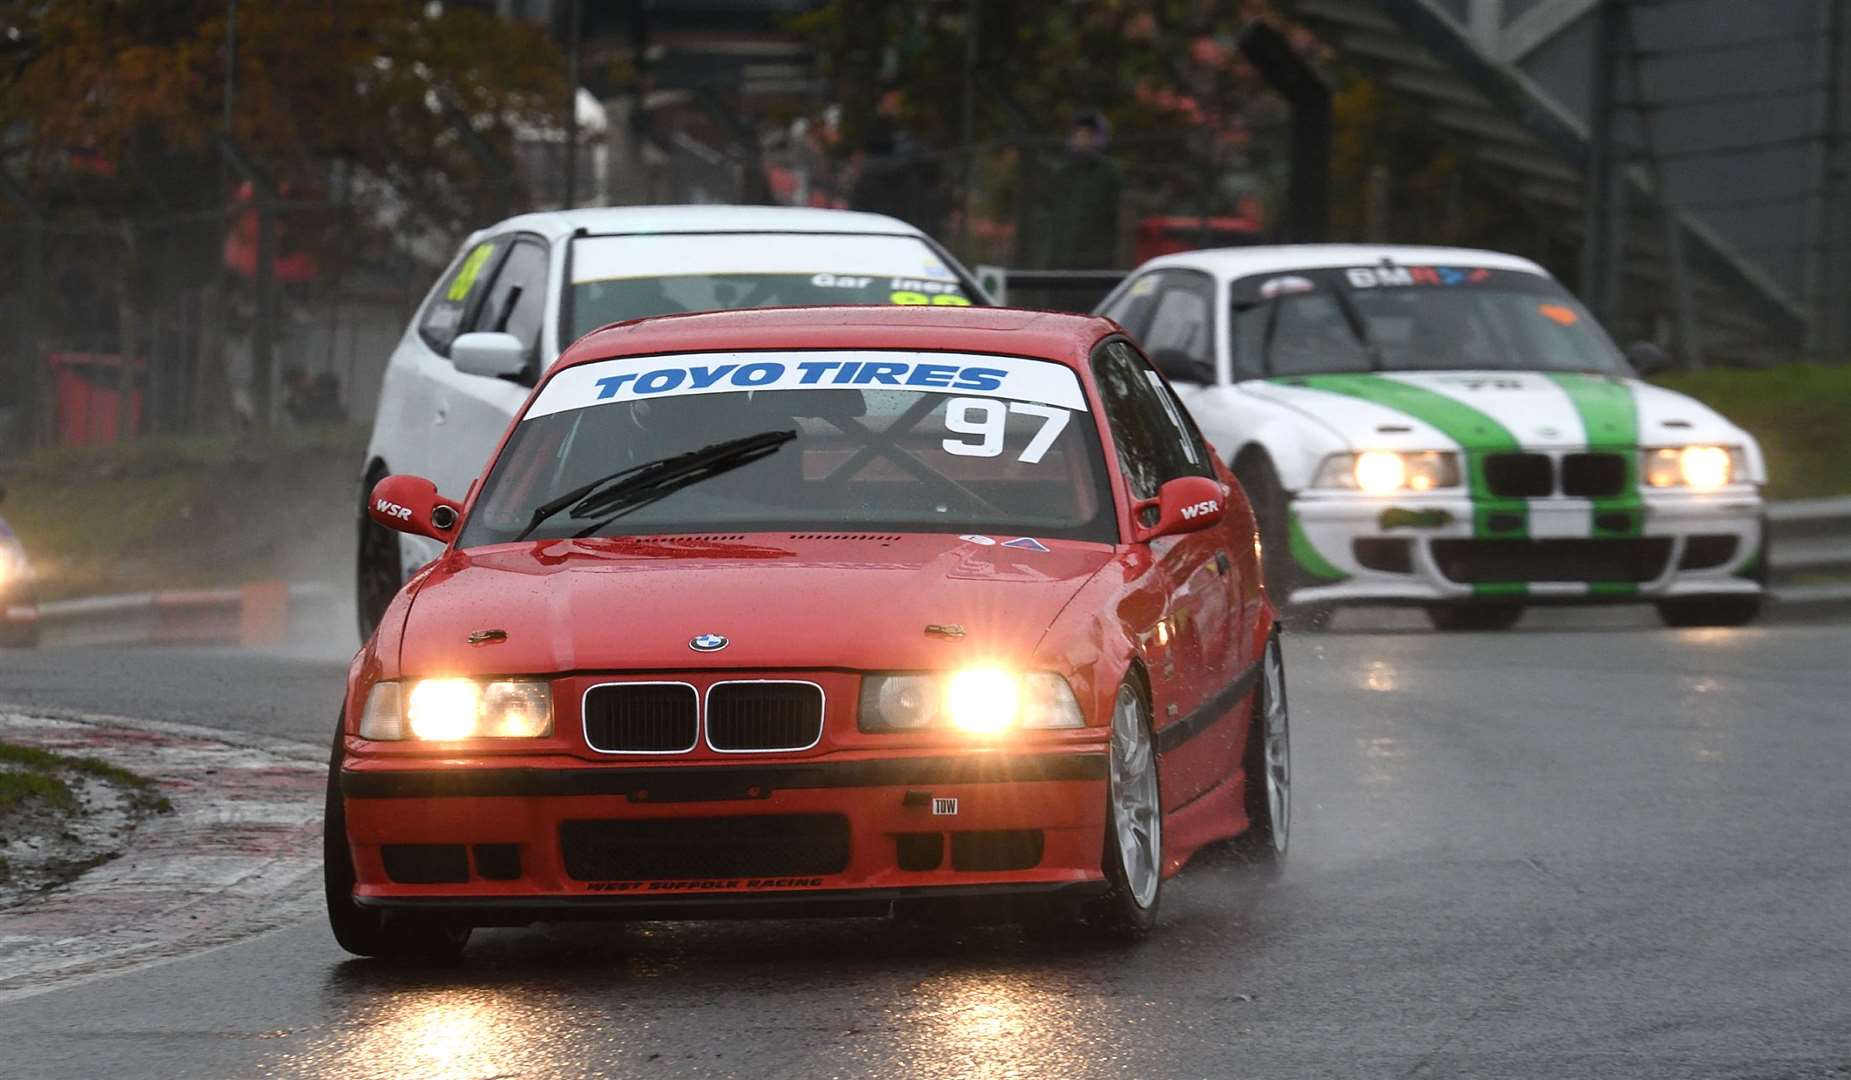 Peter Seldon, from Sevenoaks, claimed two class wins in the Super Saloons races in his BMW E36 M3